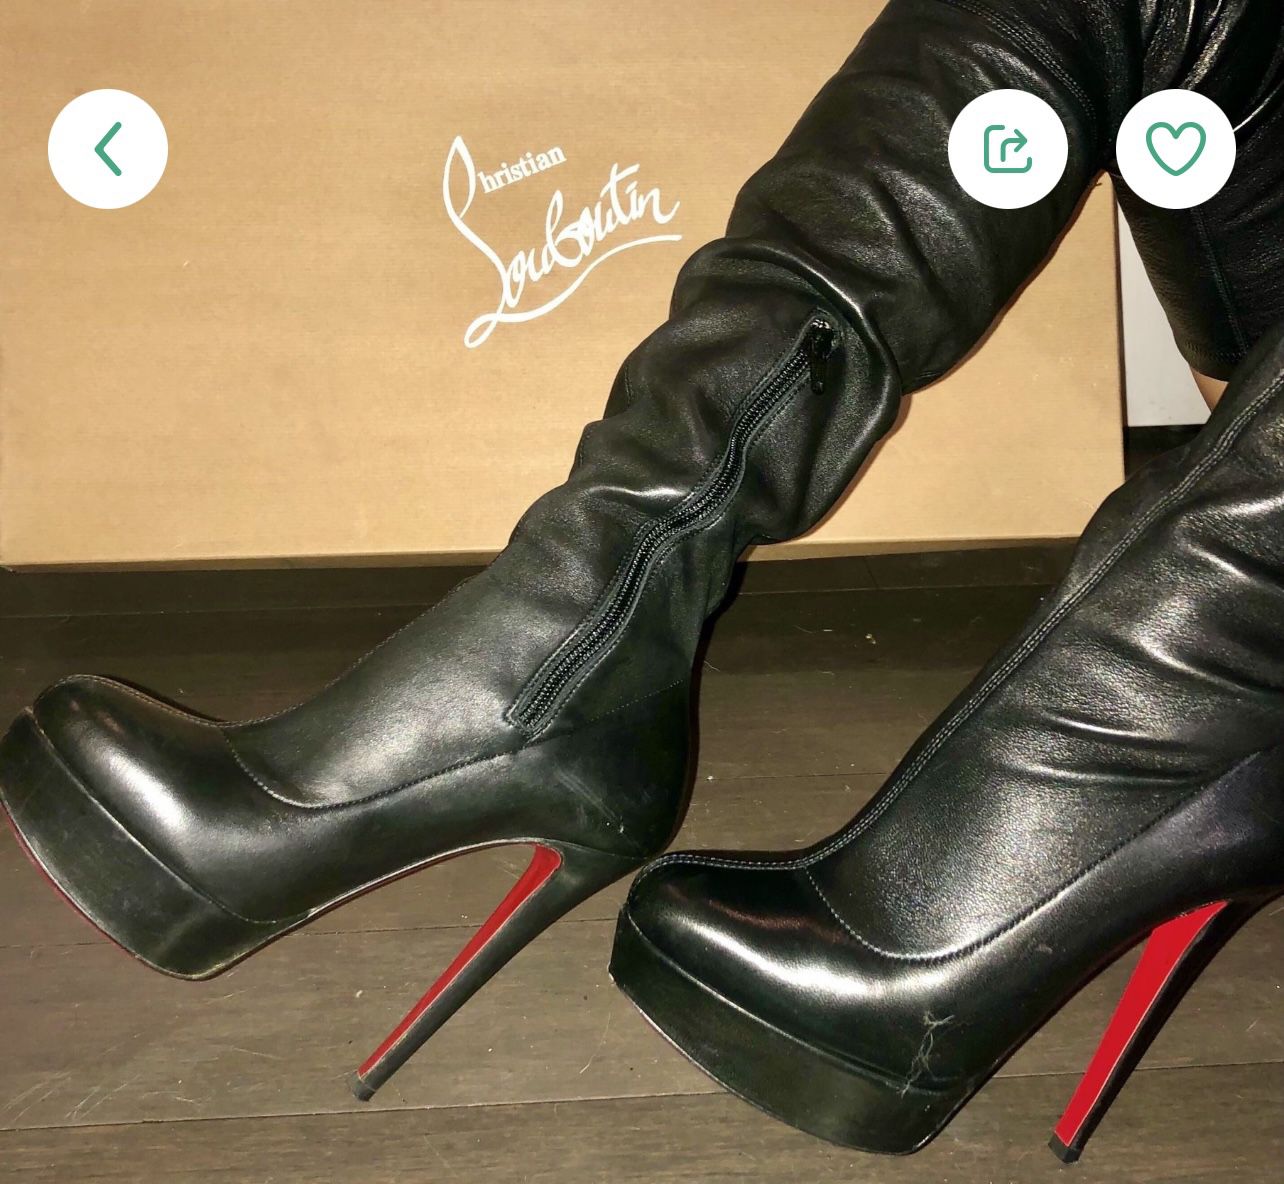 How to Wear Christian Louboutin Boots - Search for Christian Louboutin Boots